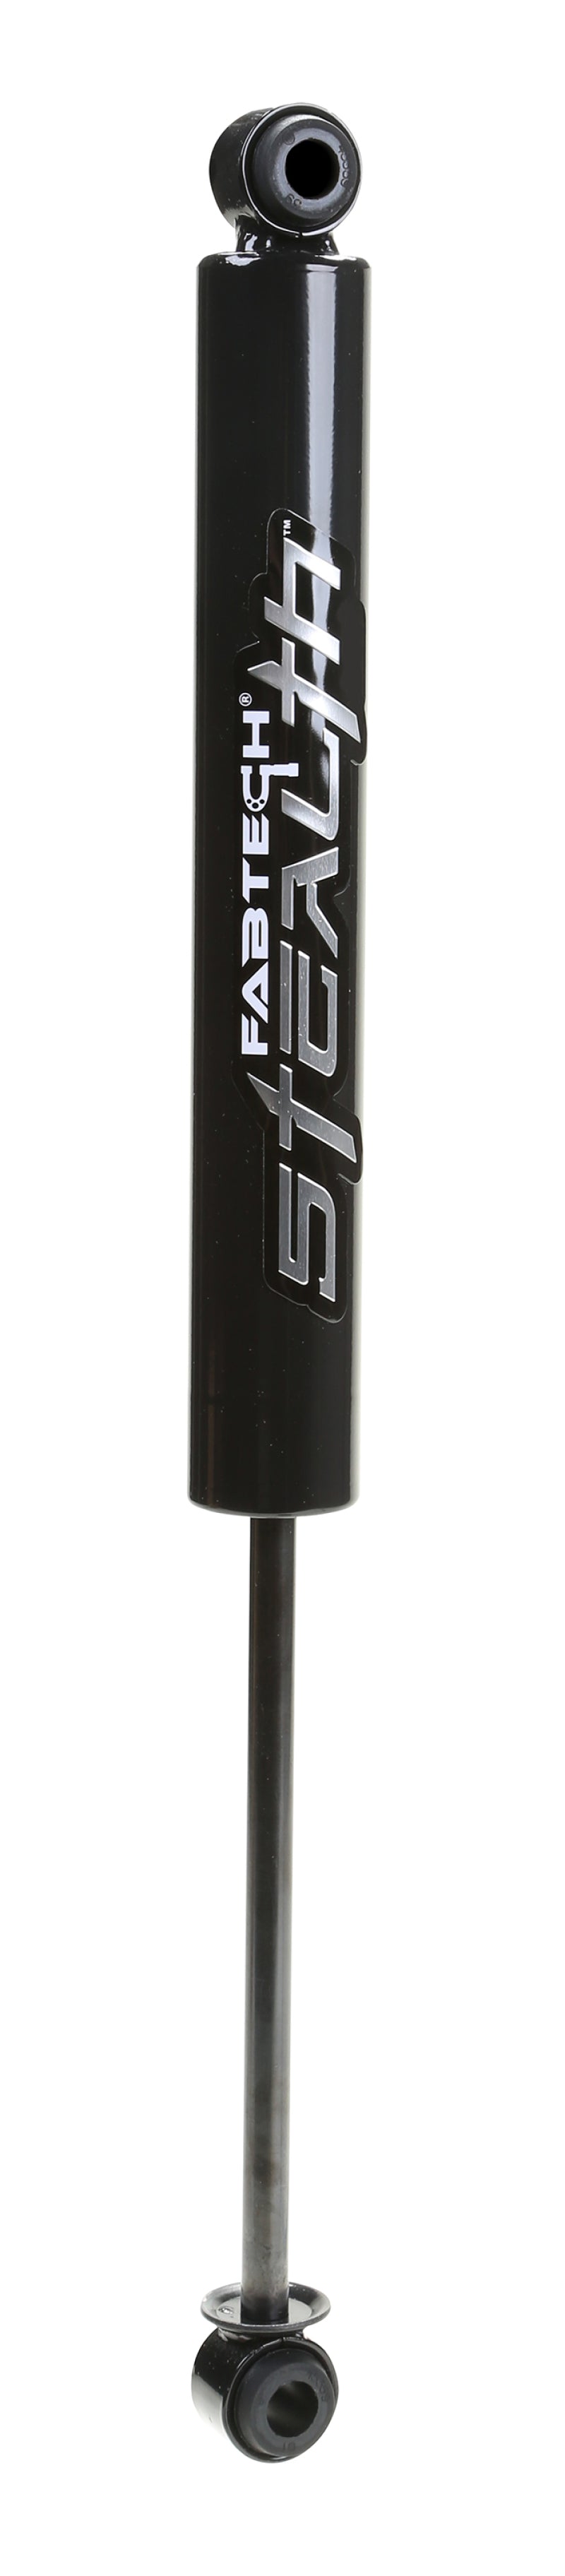 Fabtech 05-07 Ford F250/350 4WD Front Stealth Shock Absorber